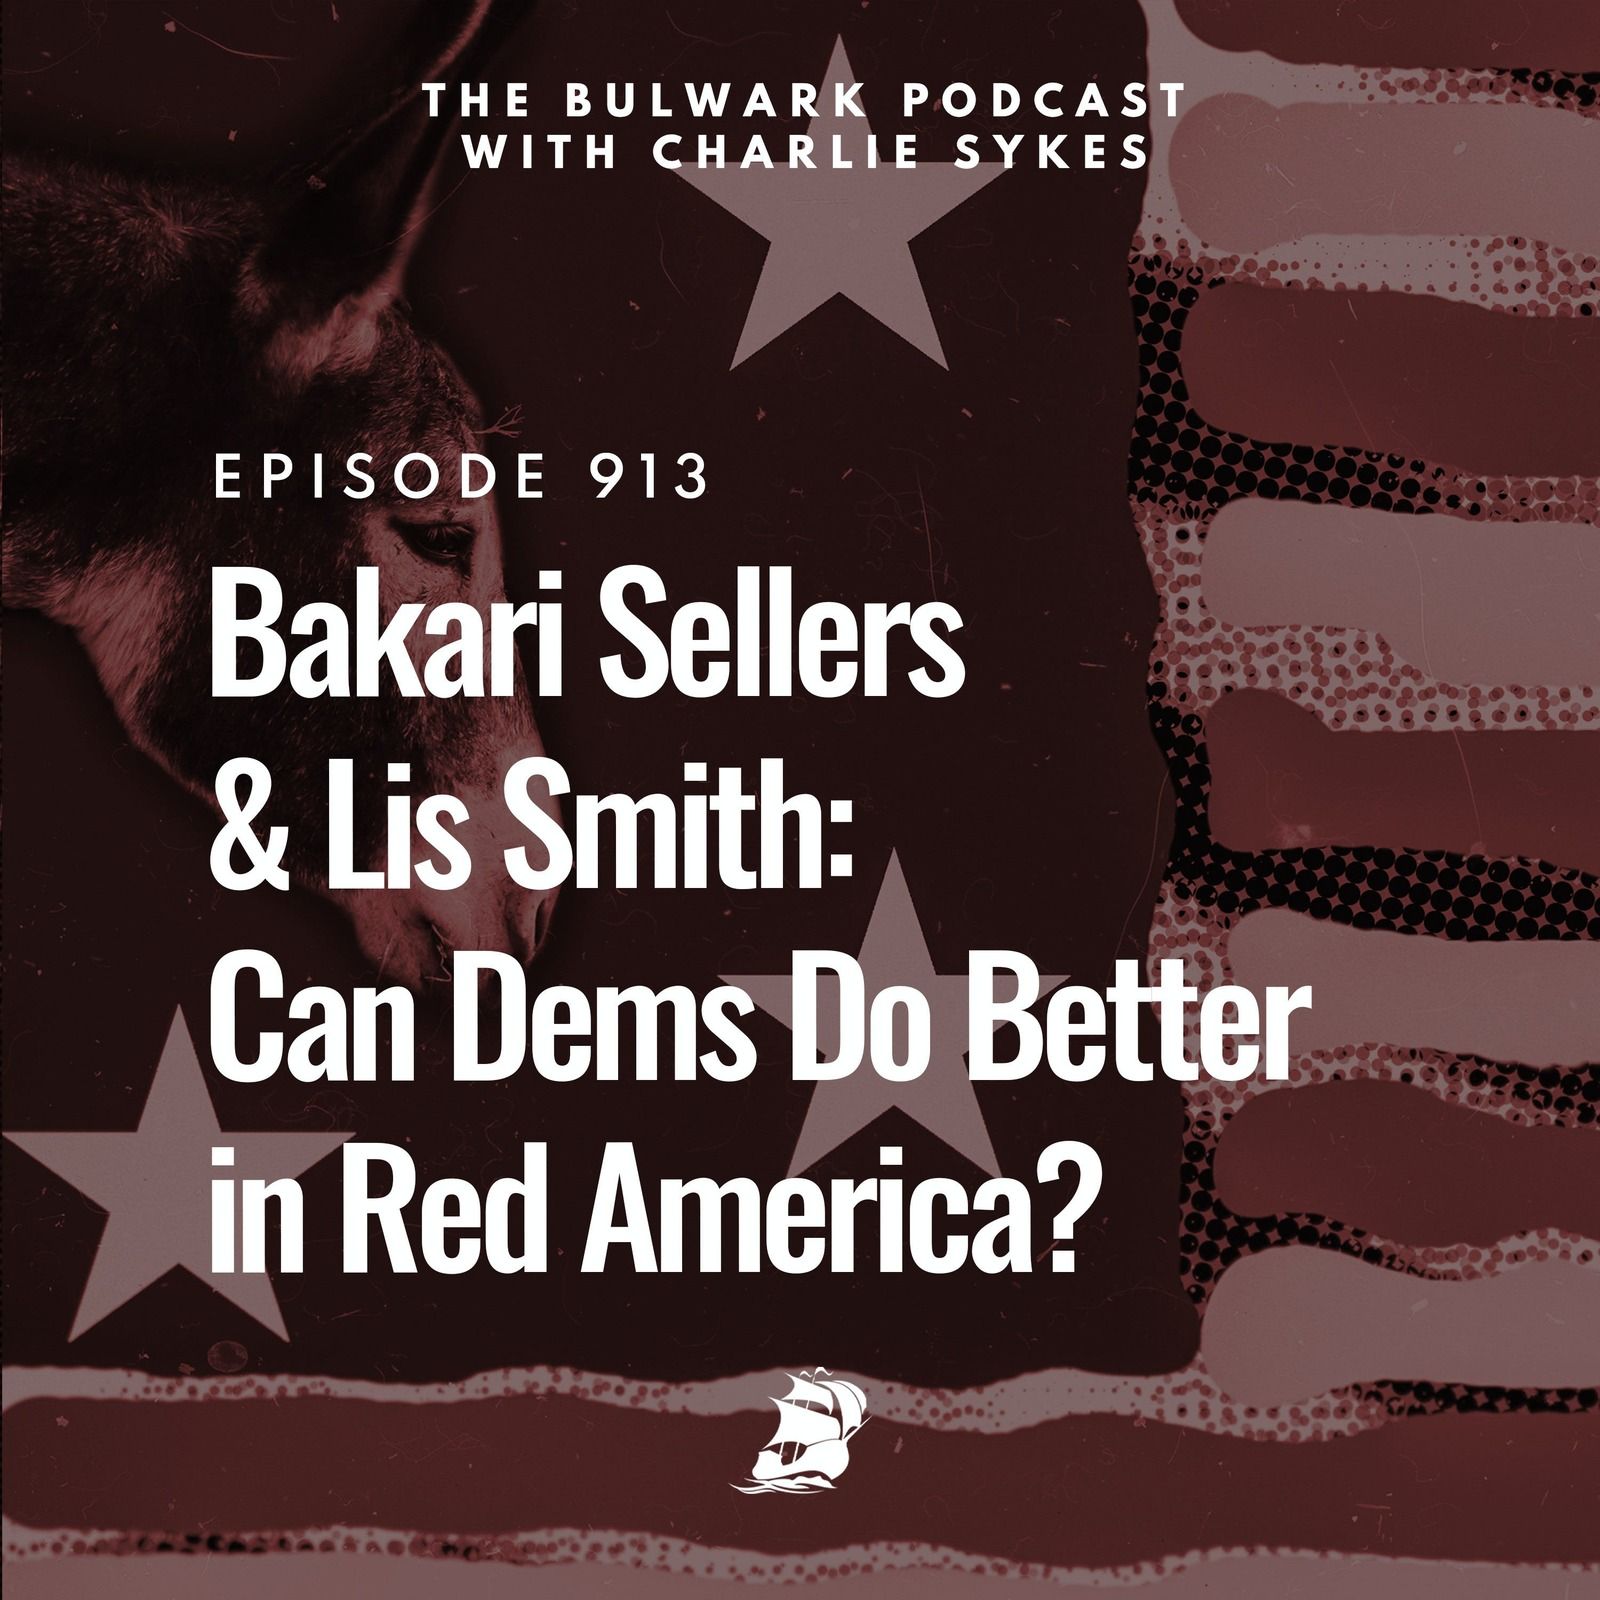 Bakari Sellers & Lis Smith: Can Dems Do Better in Red America?